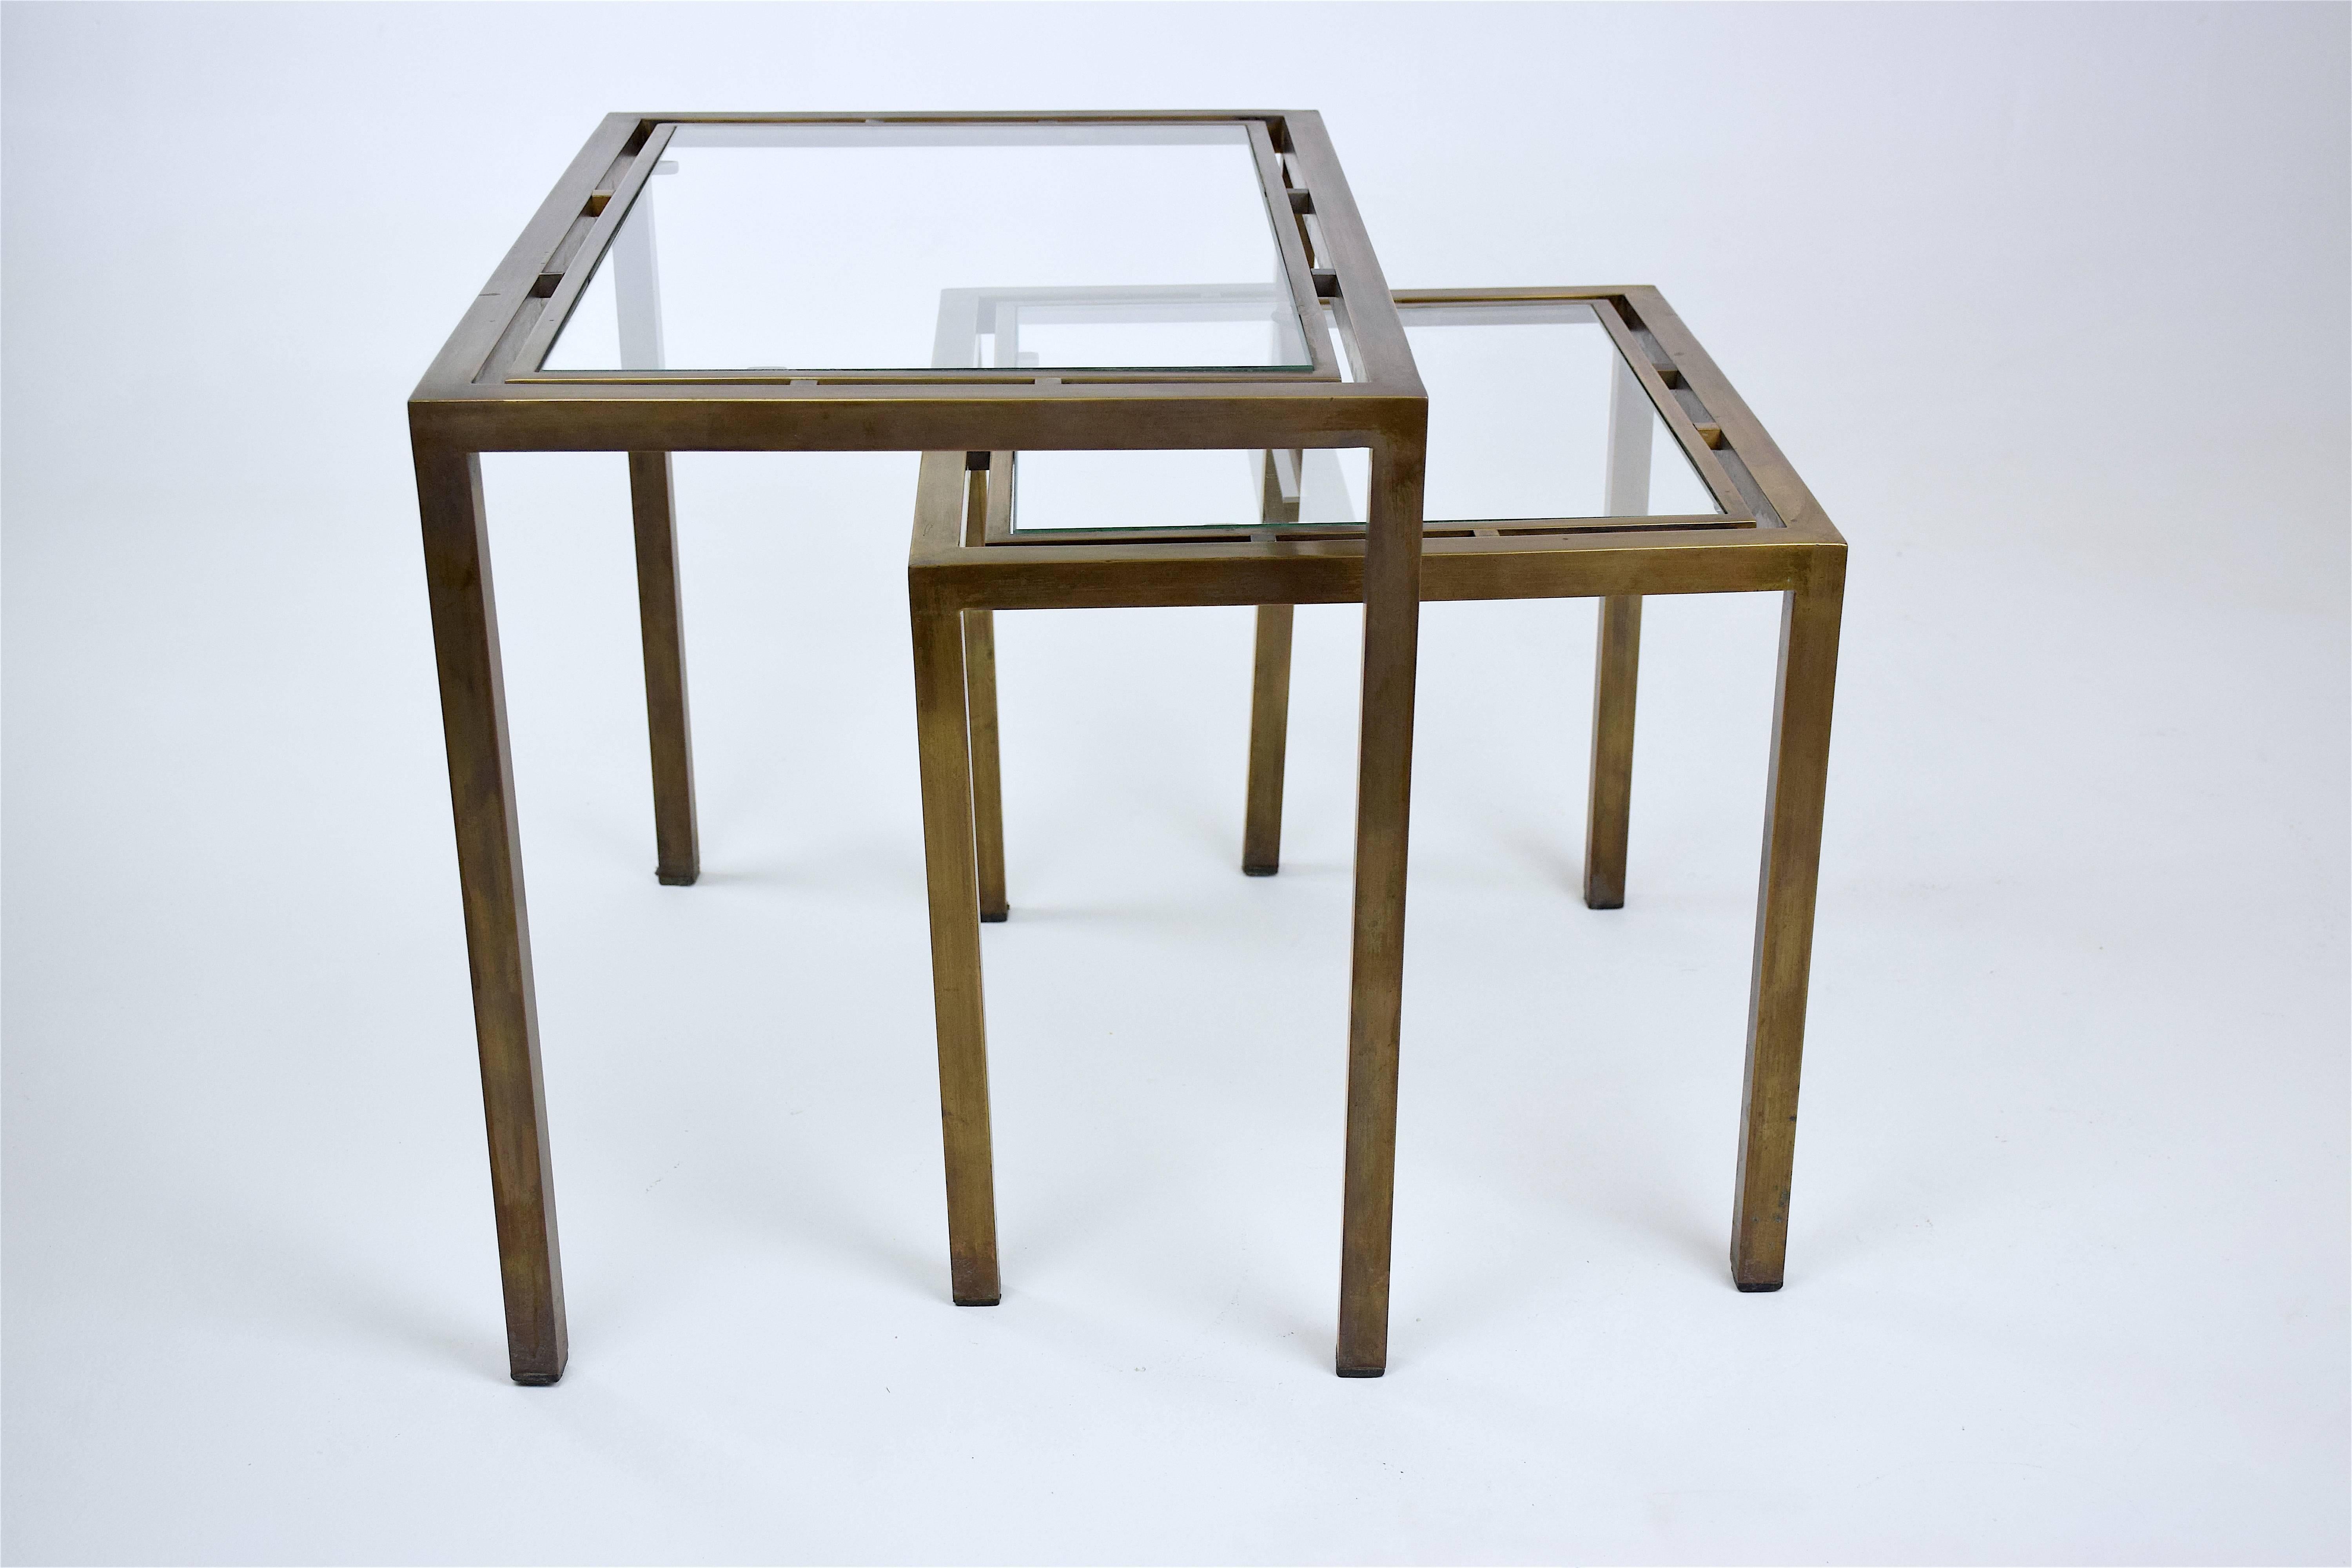 Graphic set of two 20th century vintage Mid-Century Modern nesting, side, end or coffee tables composed of solid aged brass and clear glass. 
Designed in France, circa 1970s. 
Measurements: 
37 x 55 x 42.5 cm
37 x 43 x 34.5 cm